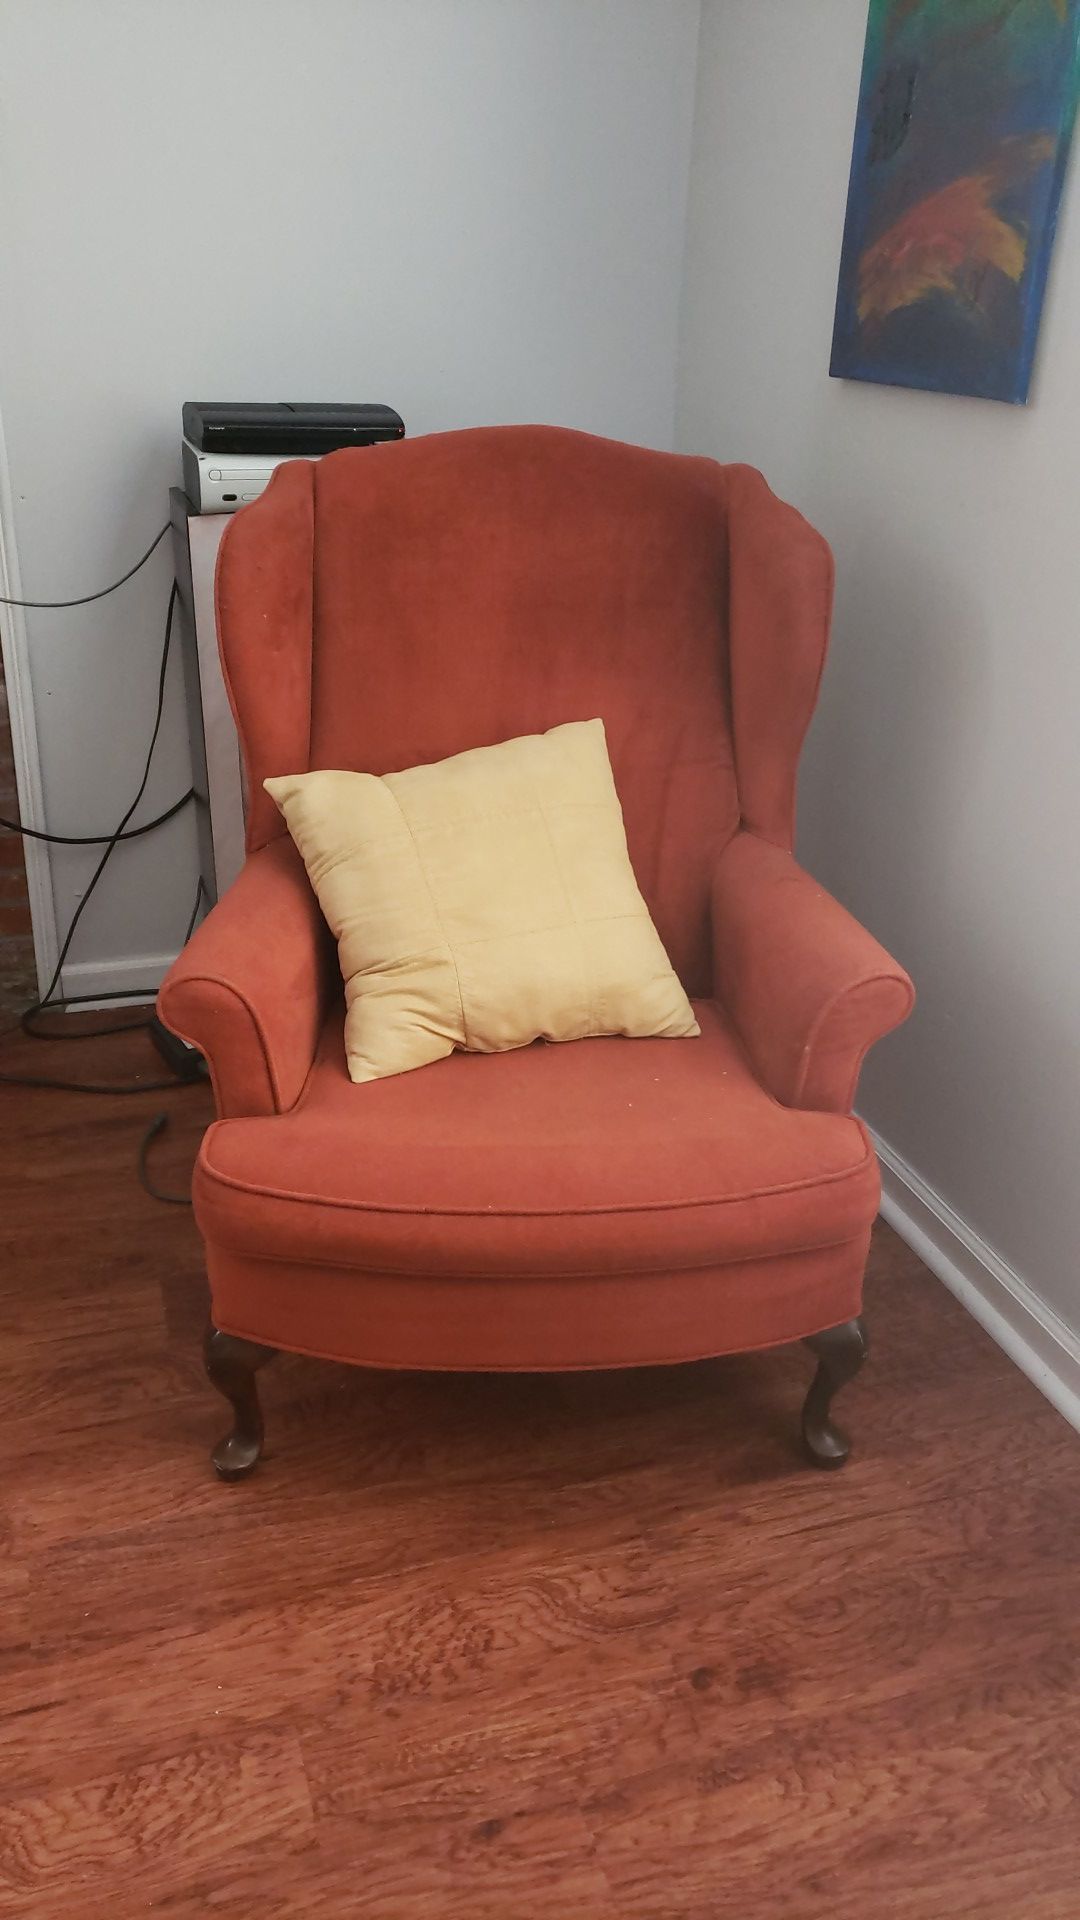 Rust colored antique chairs